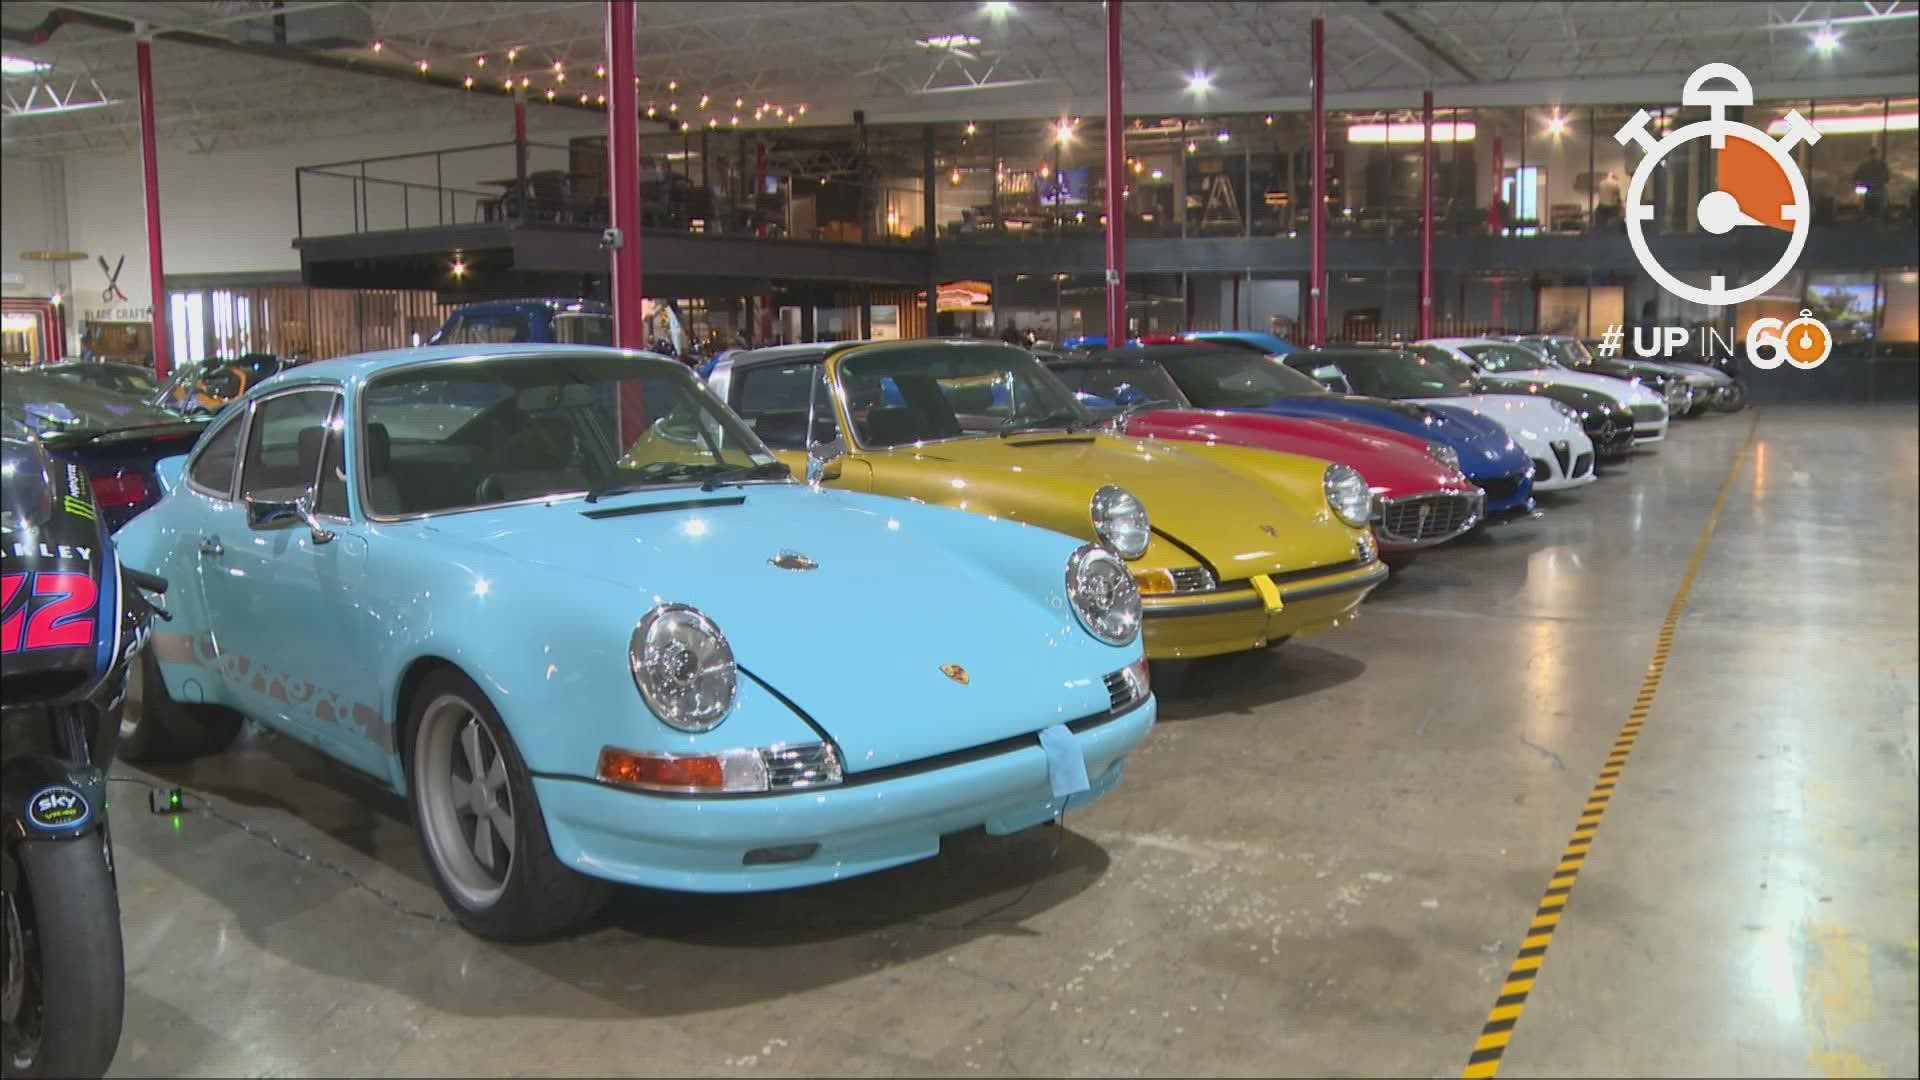 This is a must-see place for people who love cars.